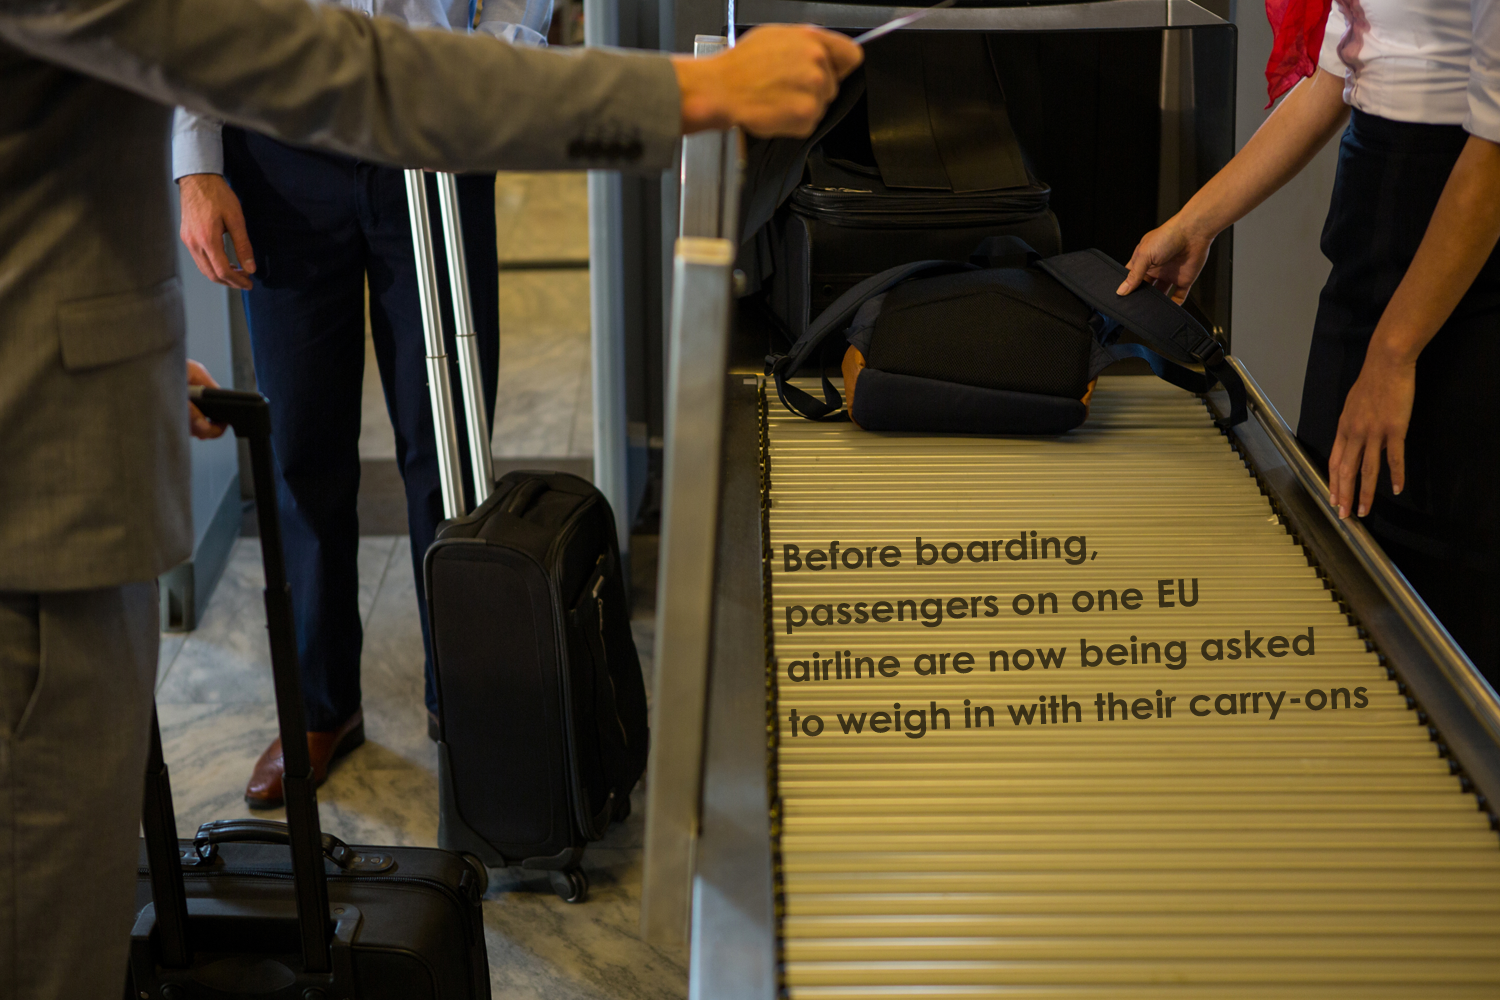 Before boarding, passengers on one EU airline are now being asked to weigh in with their carry-ons.